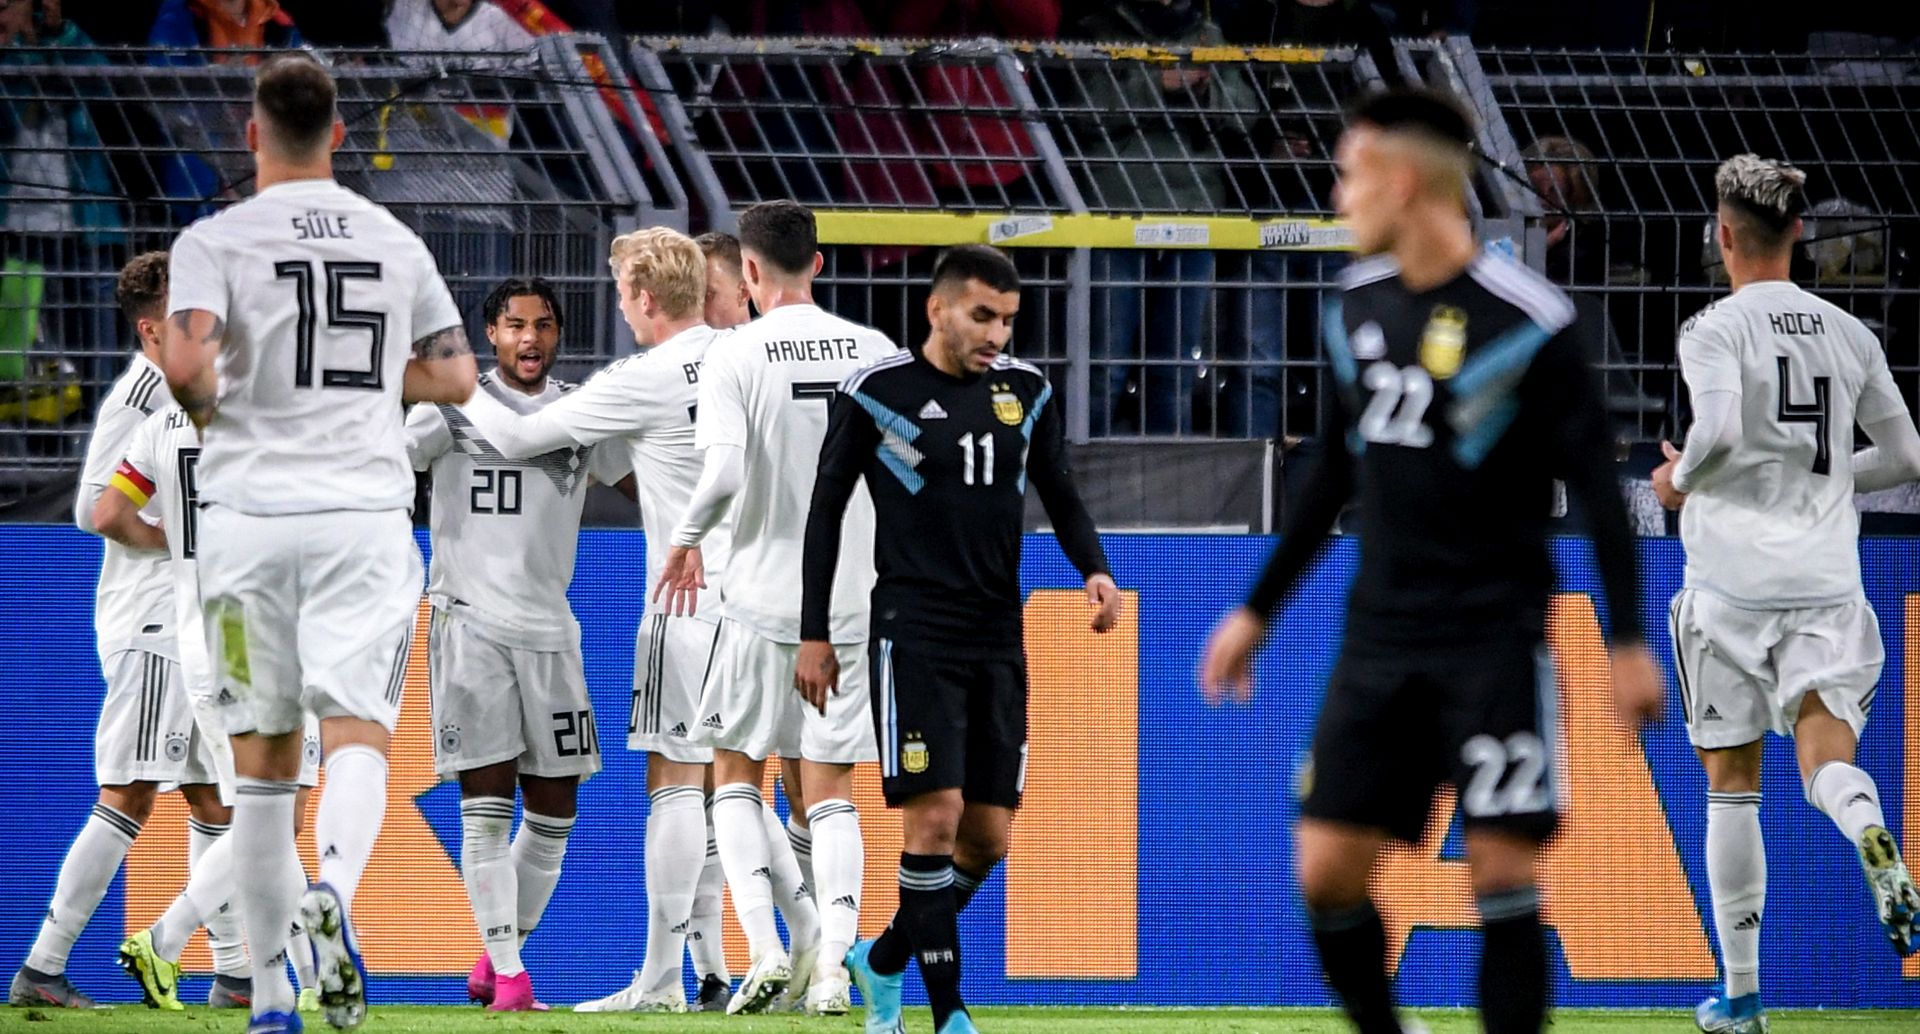 epa07908383 Germany's Serge Gnabry (3-L) celebrates with his teammates after scoring the 1-0 lead during the international friendly soccer match between Germany and Argentina in Dortmund, Germany, 09 October 2019.  EPA/SASCHA STEINBACH